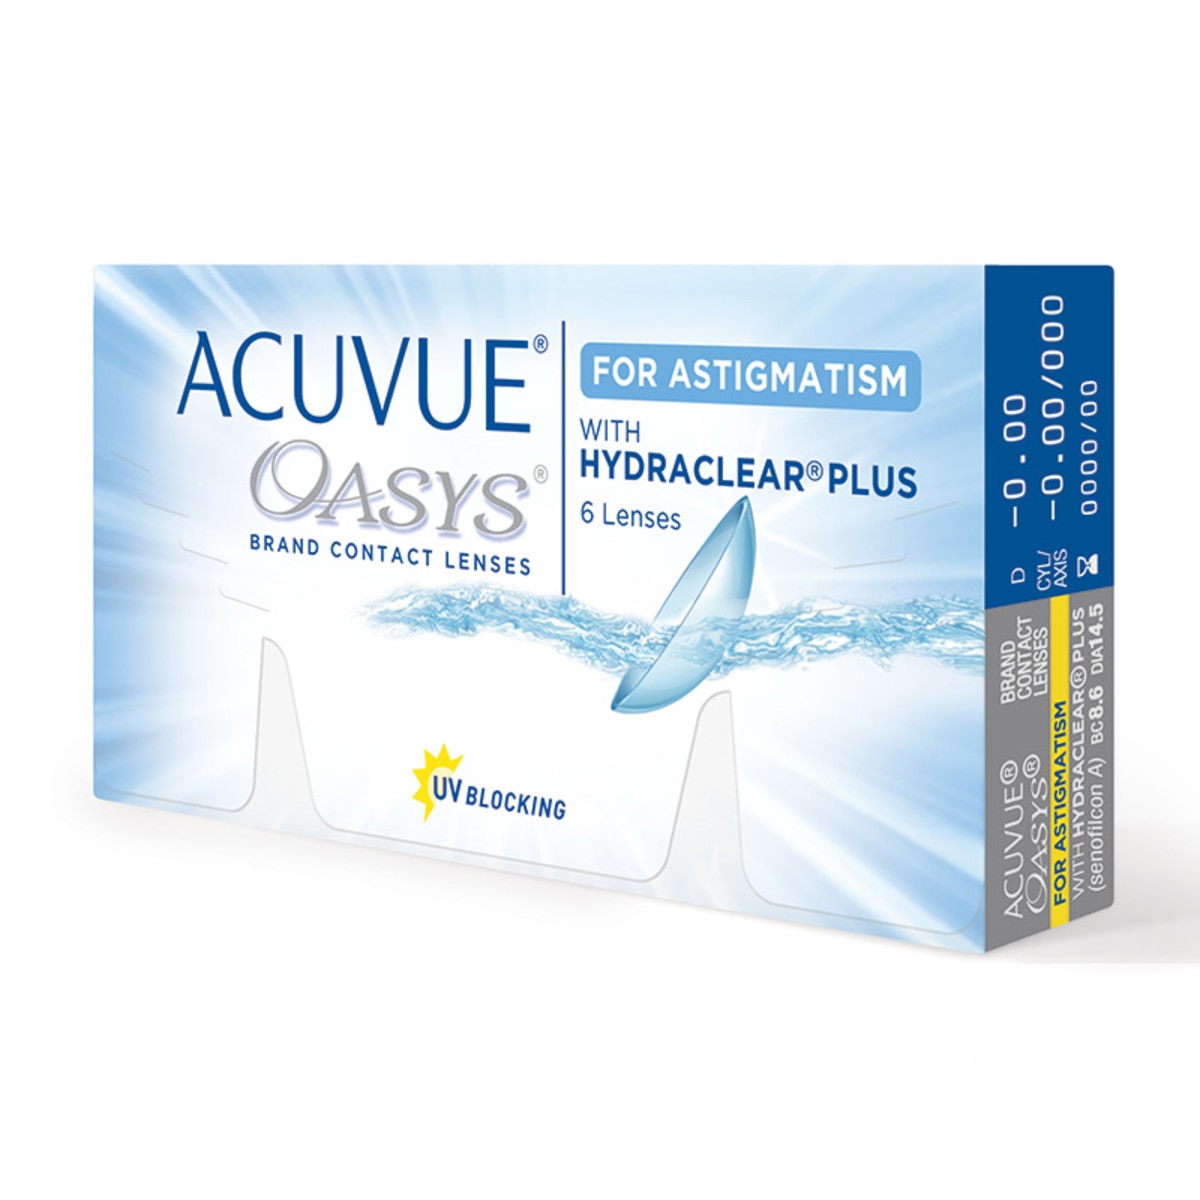 ACUVUE OASYS® con HYDRACLEAR Plus® para Astigmatismo (D -3.25, Cyl/Axis -2.25/80)